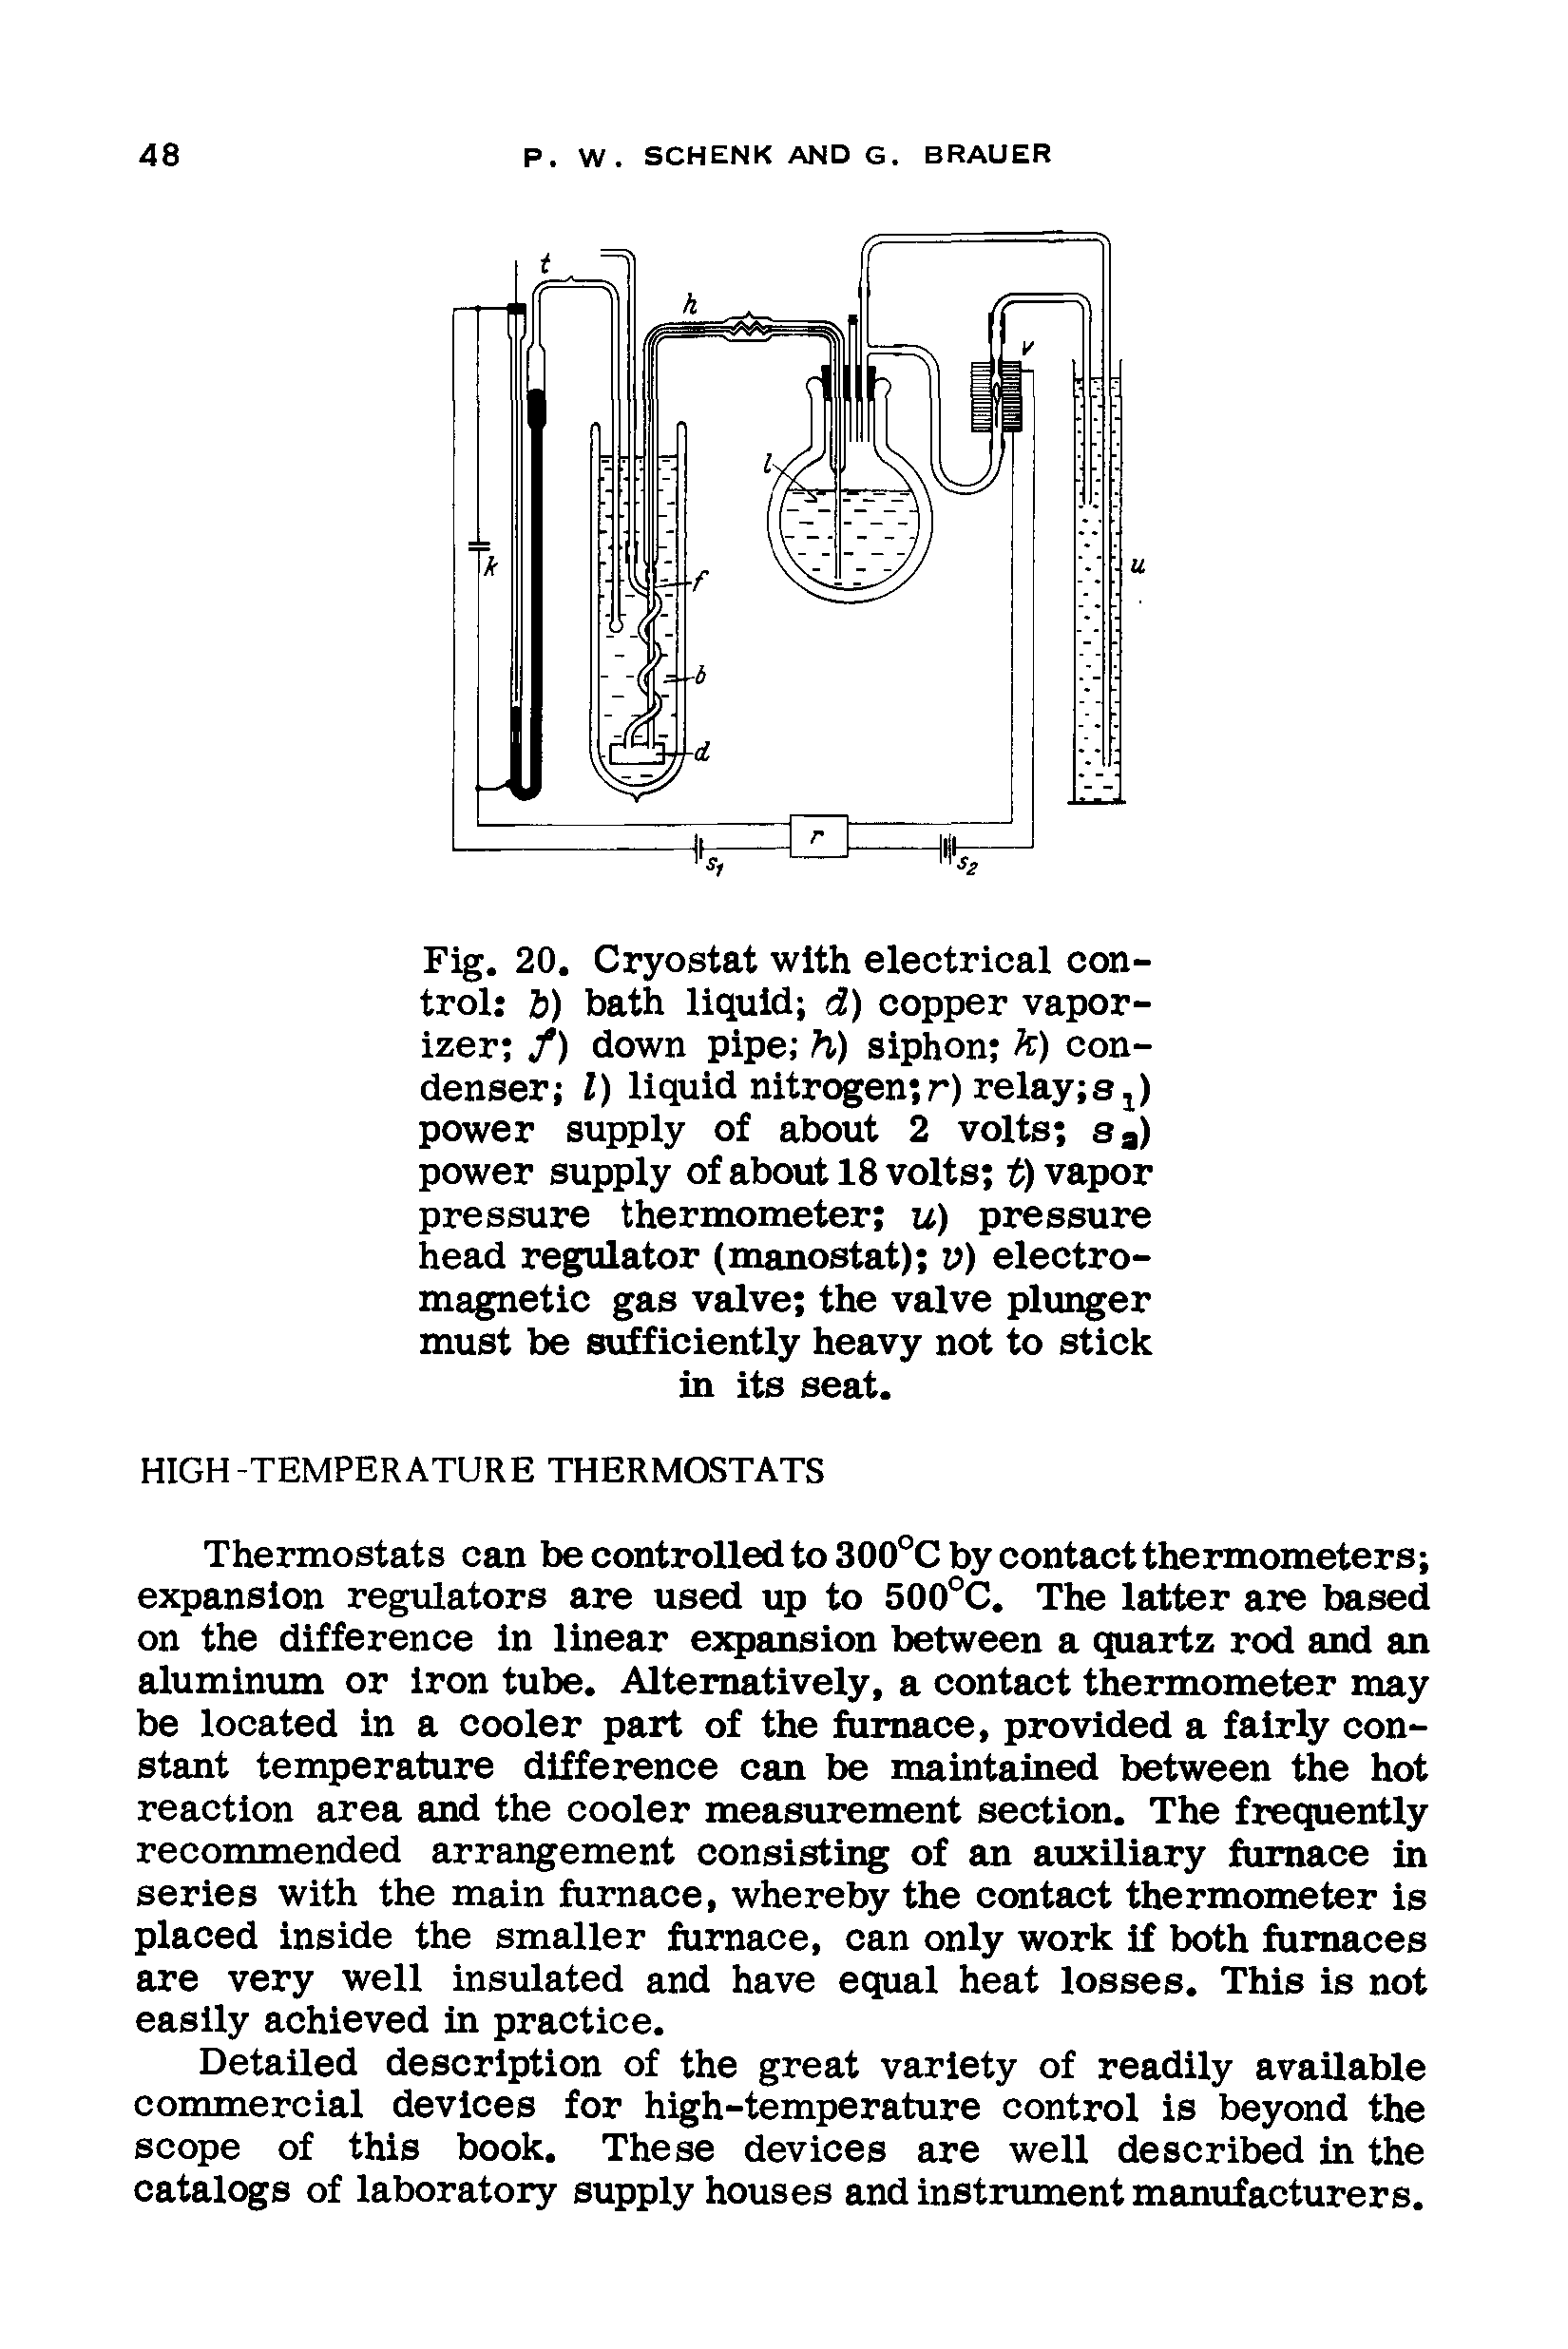 Fig. 20. Cryostat with electrical control h) bath liquid d) copper vaporizer f) down pipe h) siphon h) condenser 1) liquid nitrogen r) relay Sj) power supply of about 2 volts Sa) power supply of about 18 volts t) vapor pressure thermometer u) pressure head regulator (manostat) v) electromagnetic gas valve the valve plunger must be sufficiently heavy not to stick in its seat.